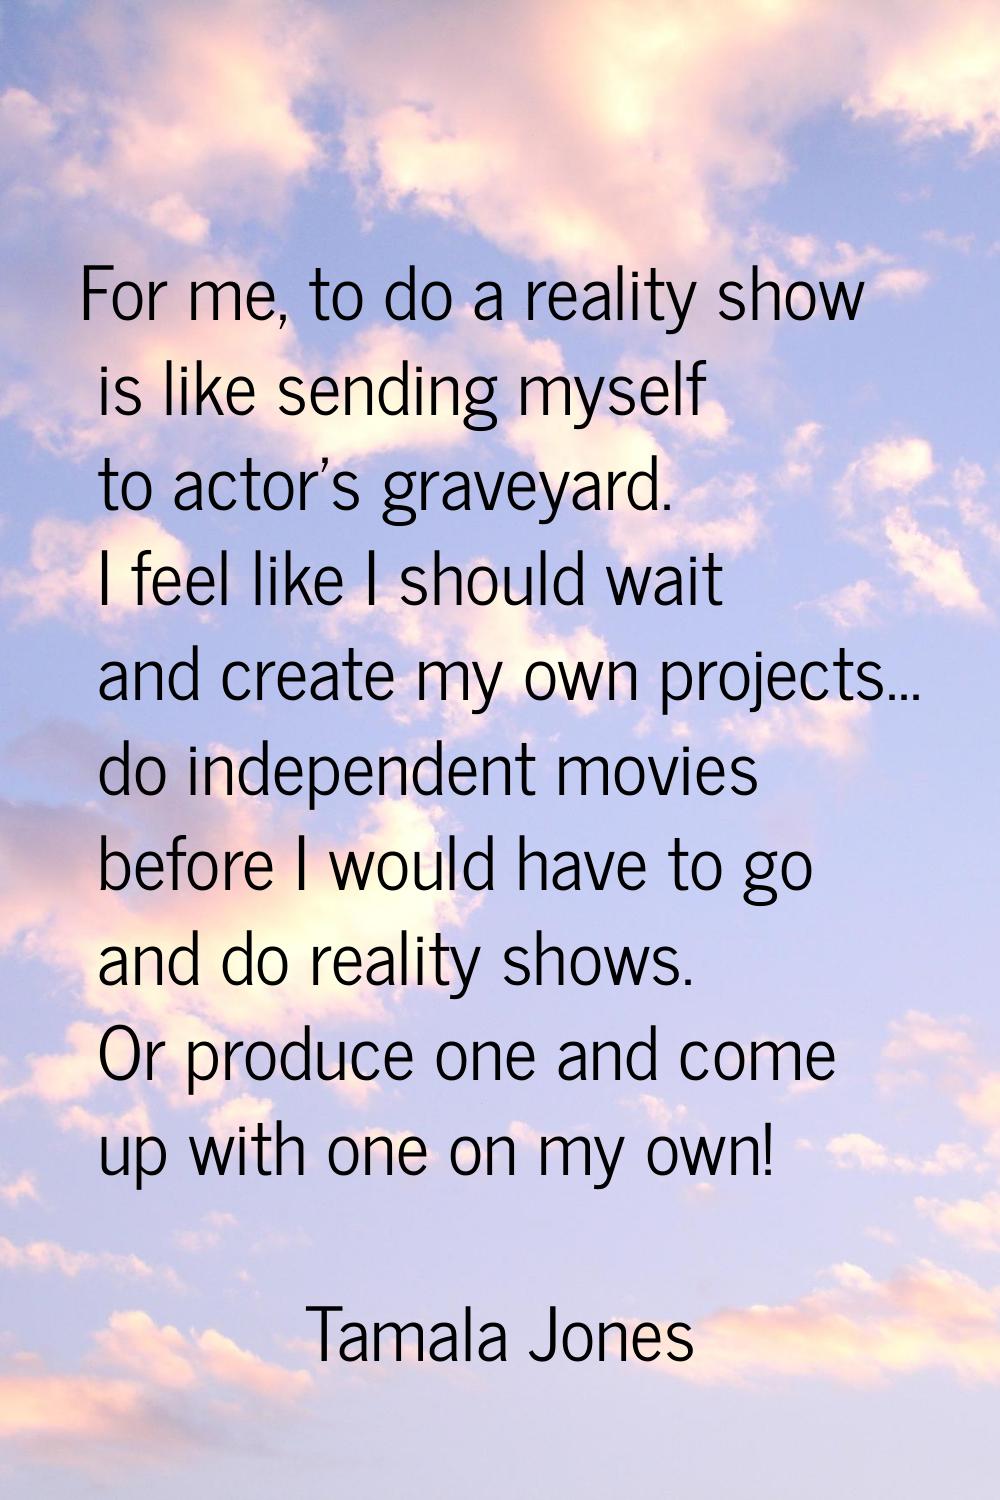 For me, to do a reality show is like sending myself to actor's graveyard. I feel like I should wait